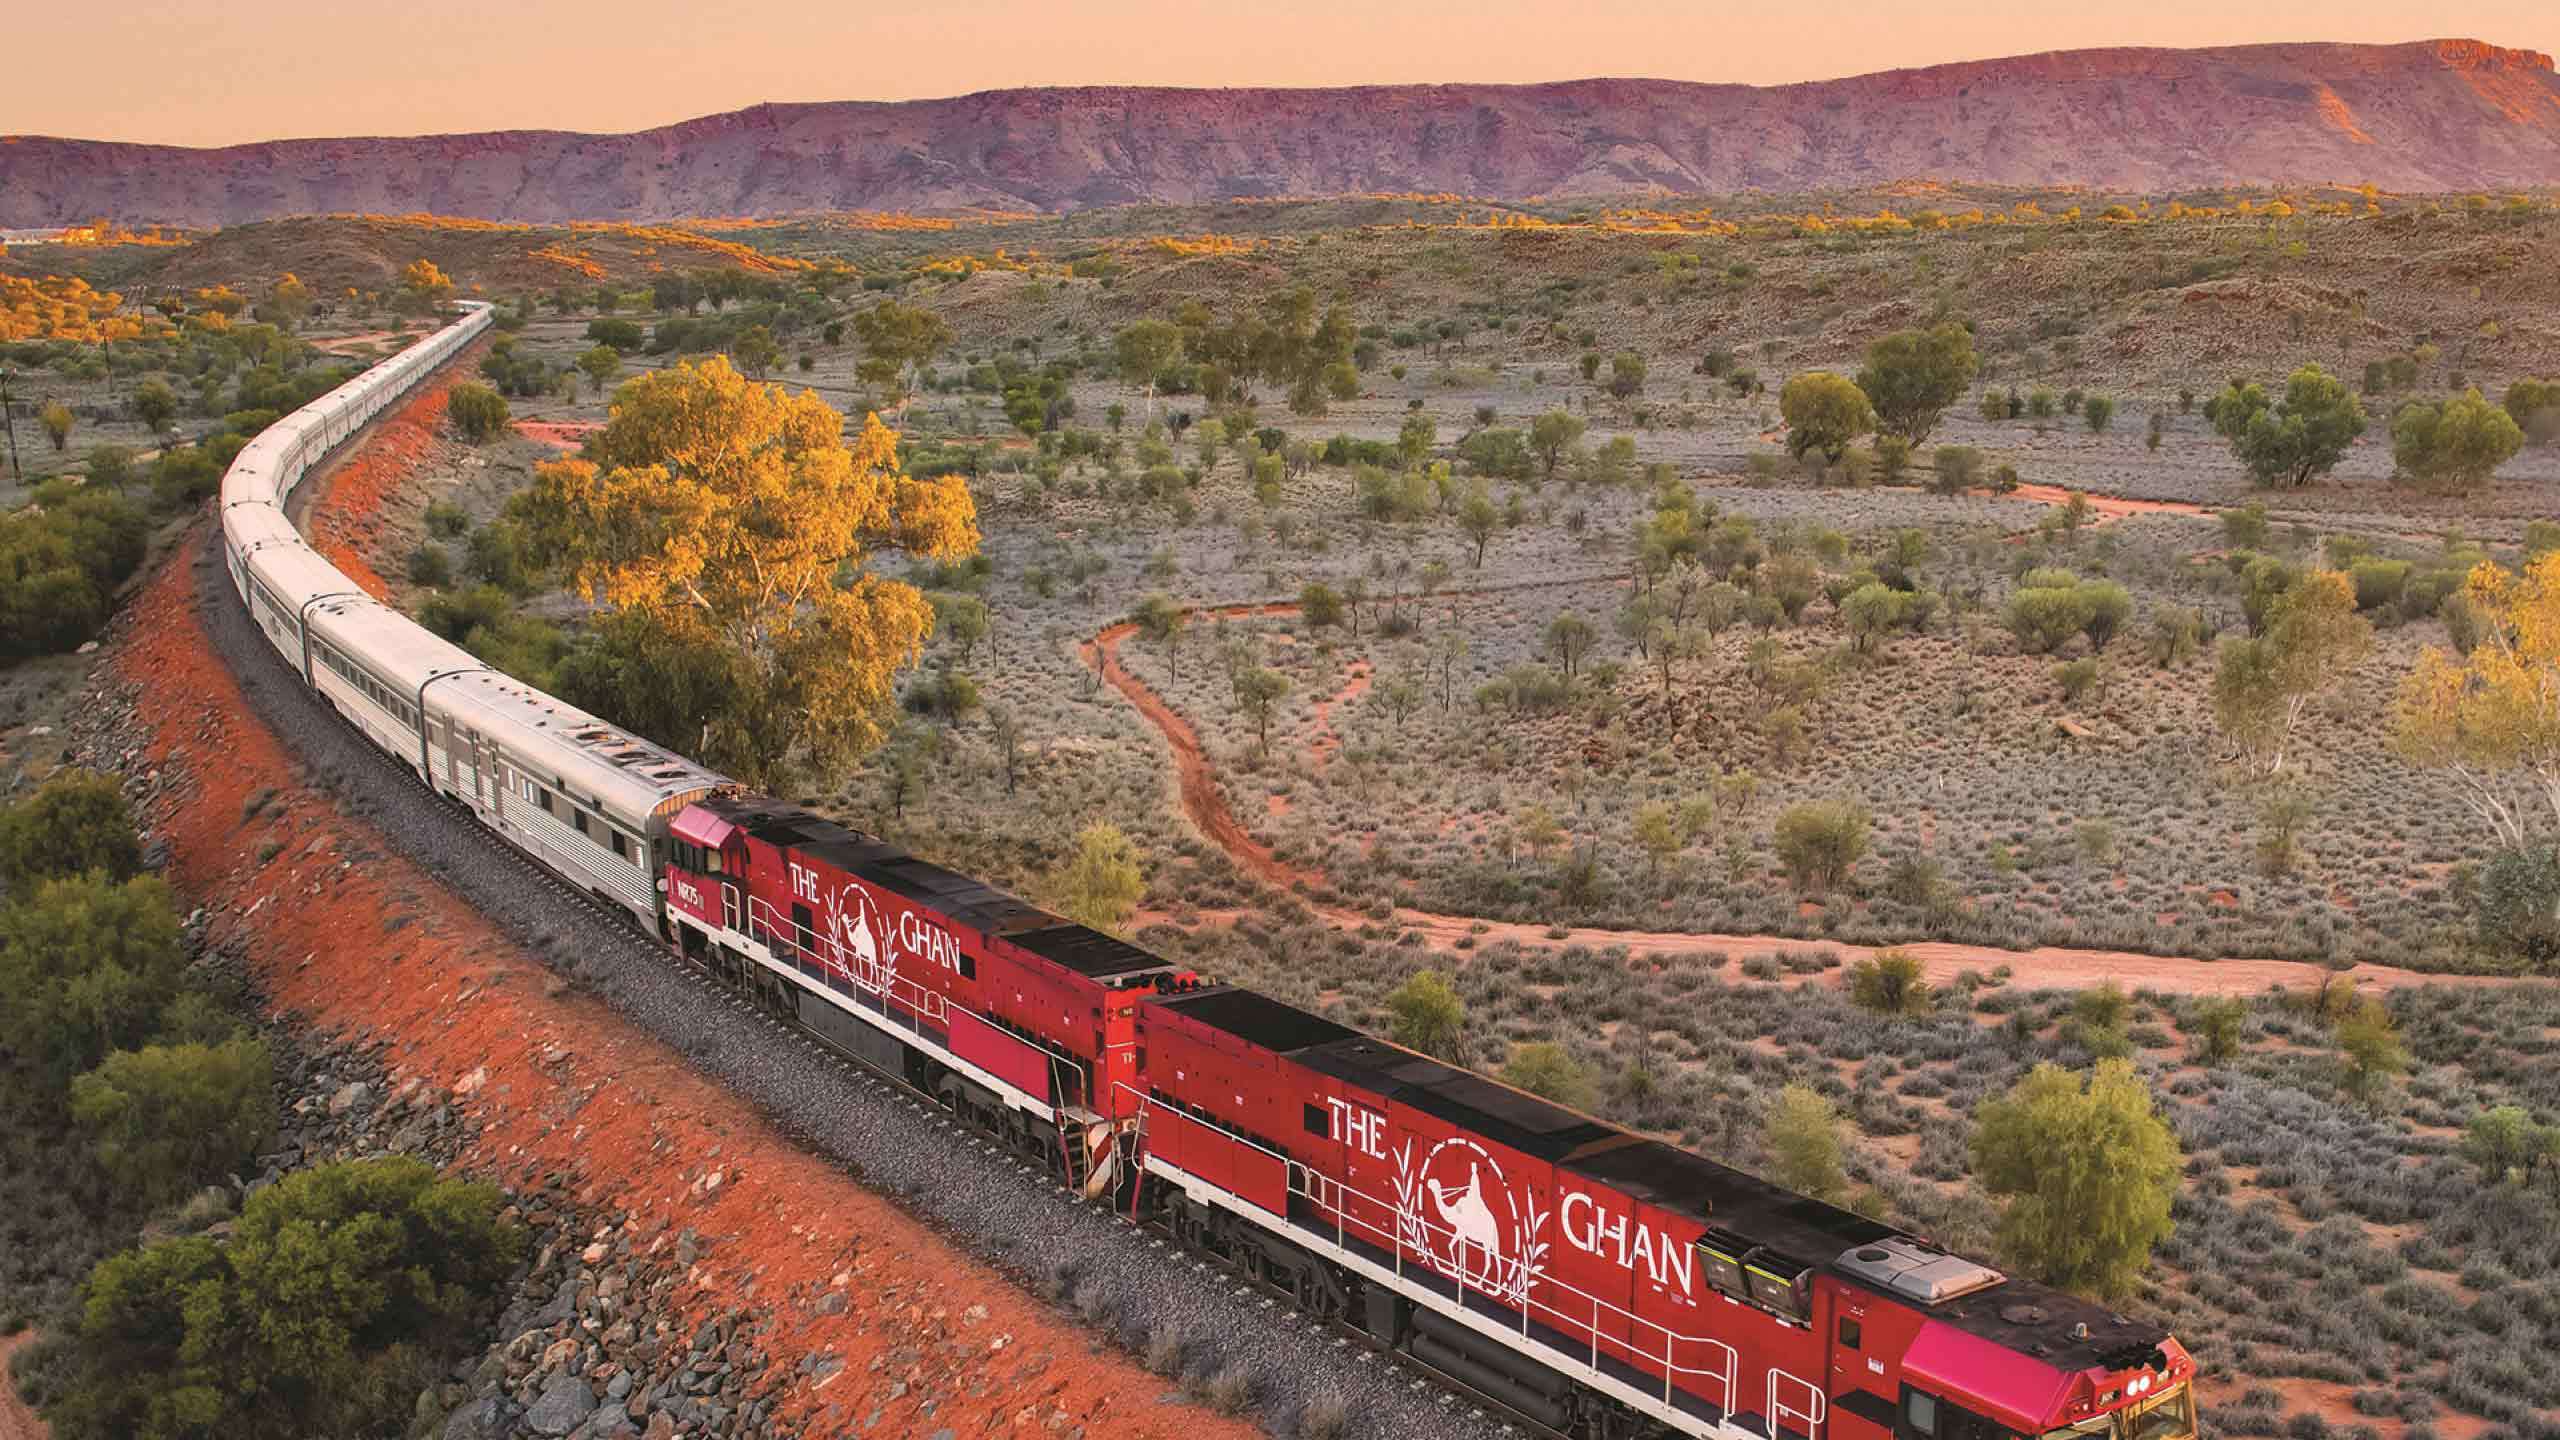 “THE GHAN” Outback Rail Journey (Darwin to Adelaide) 3D2N